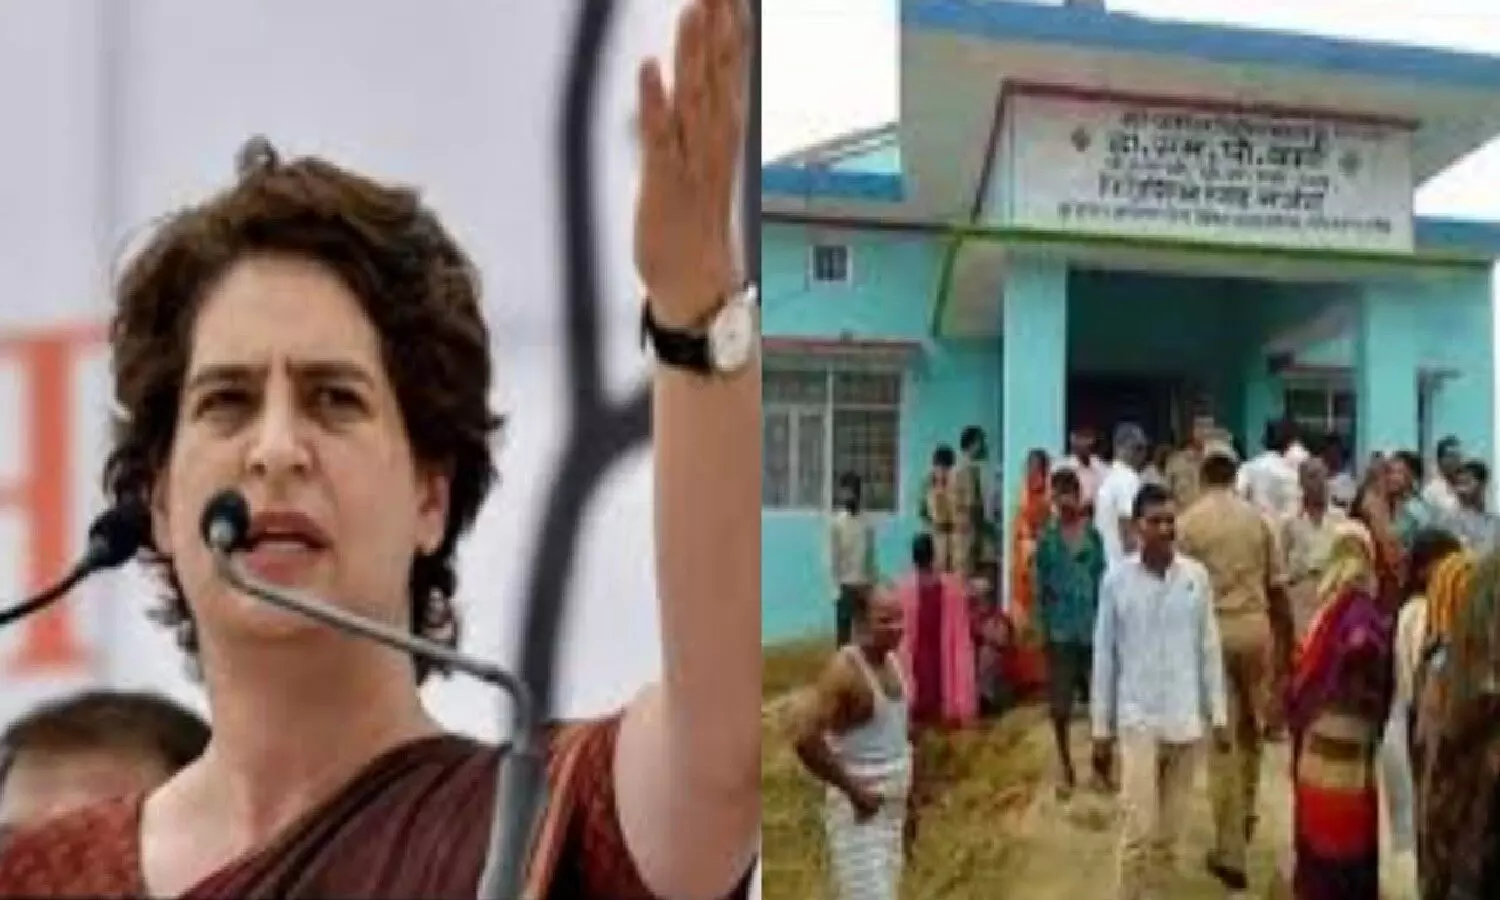 Entering the clinic in Sitapur, cut the doctor with a sword, Priyanka Gandhi said Jungle Raj in UP